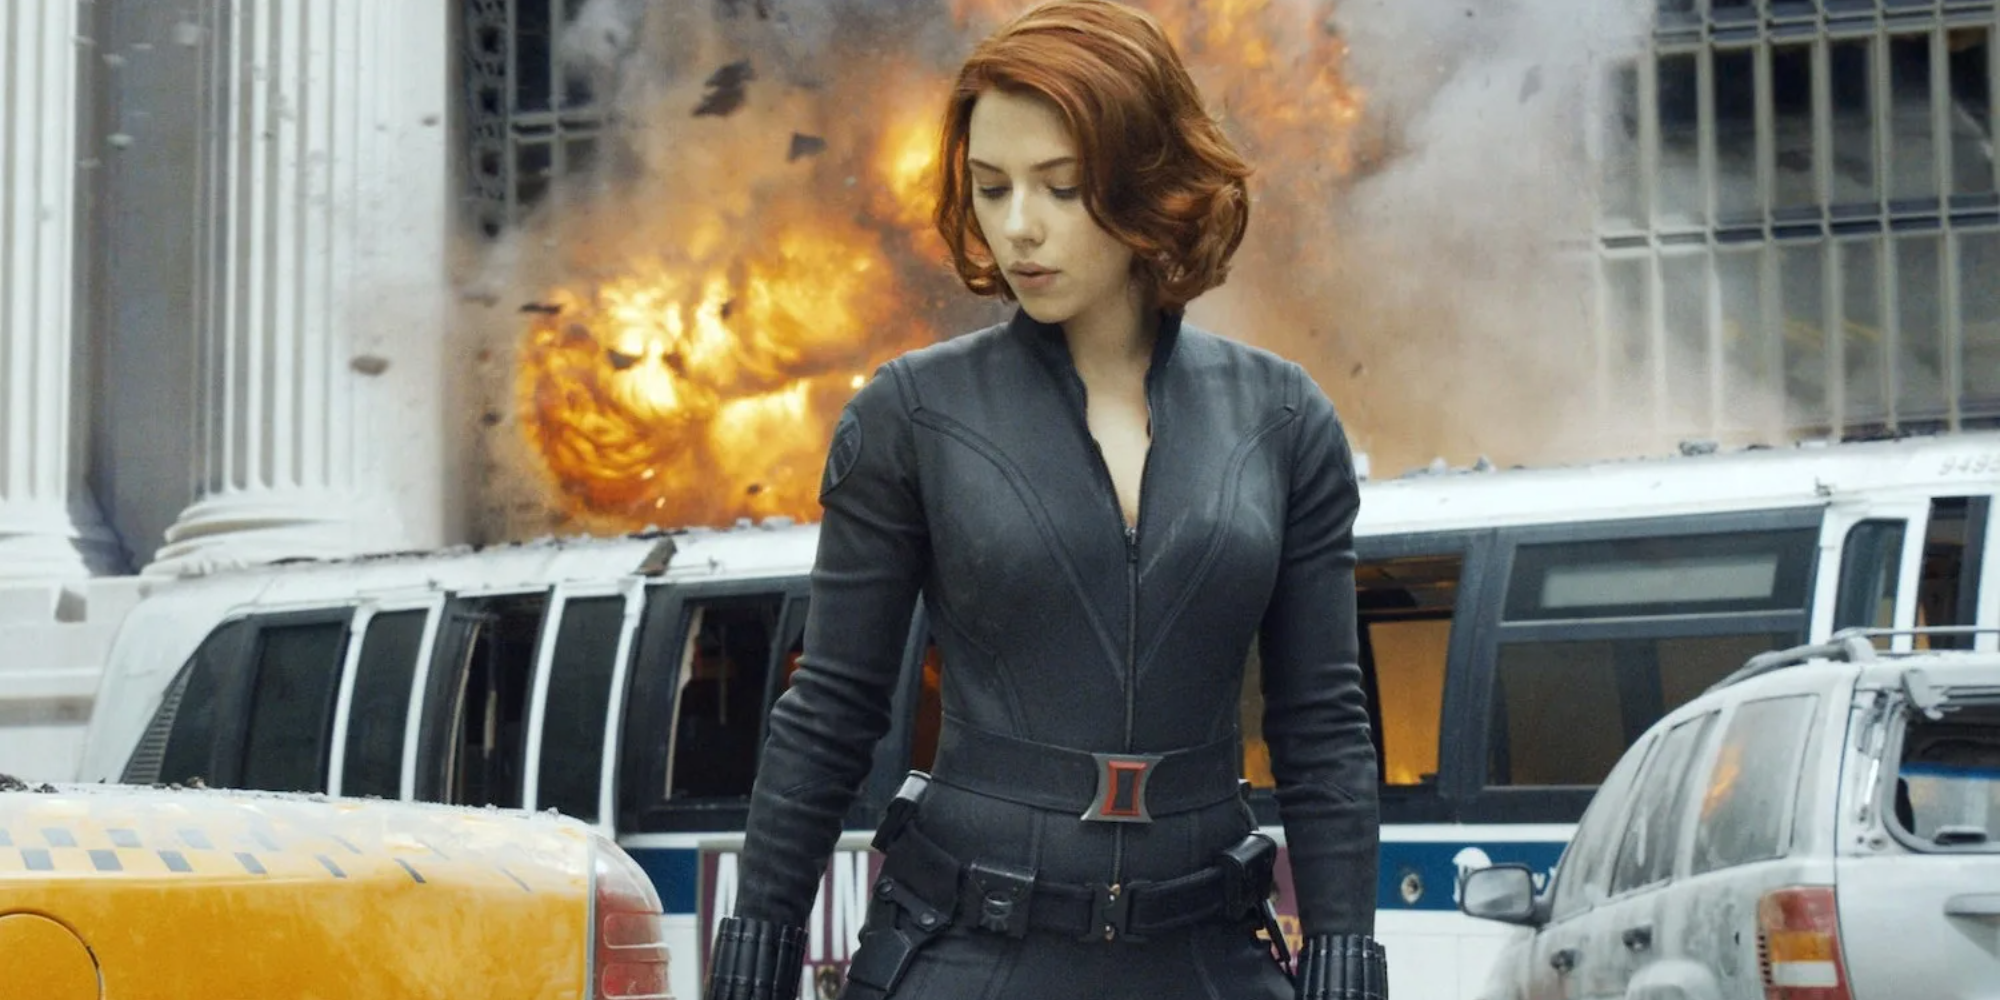 Black Widow (Scarlett Johansson) looks away from an explosion during the battle of New York in Avengers